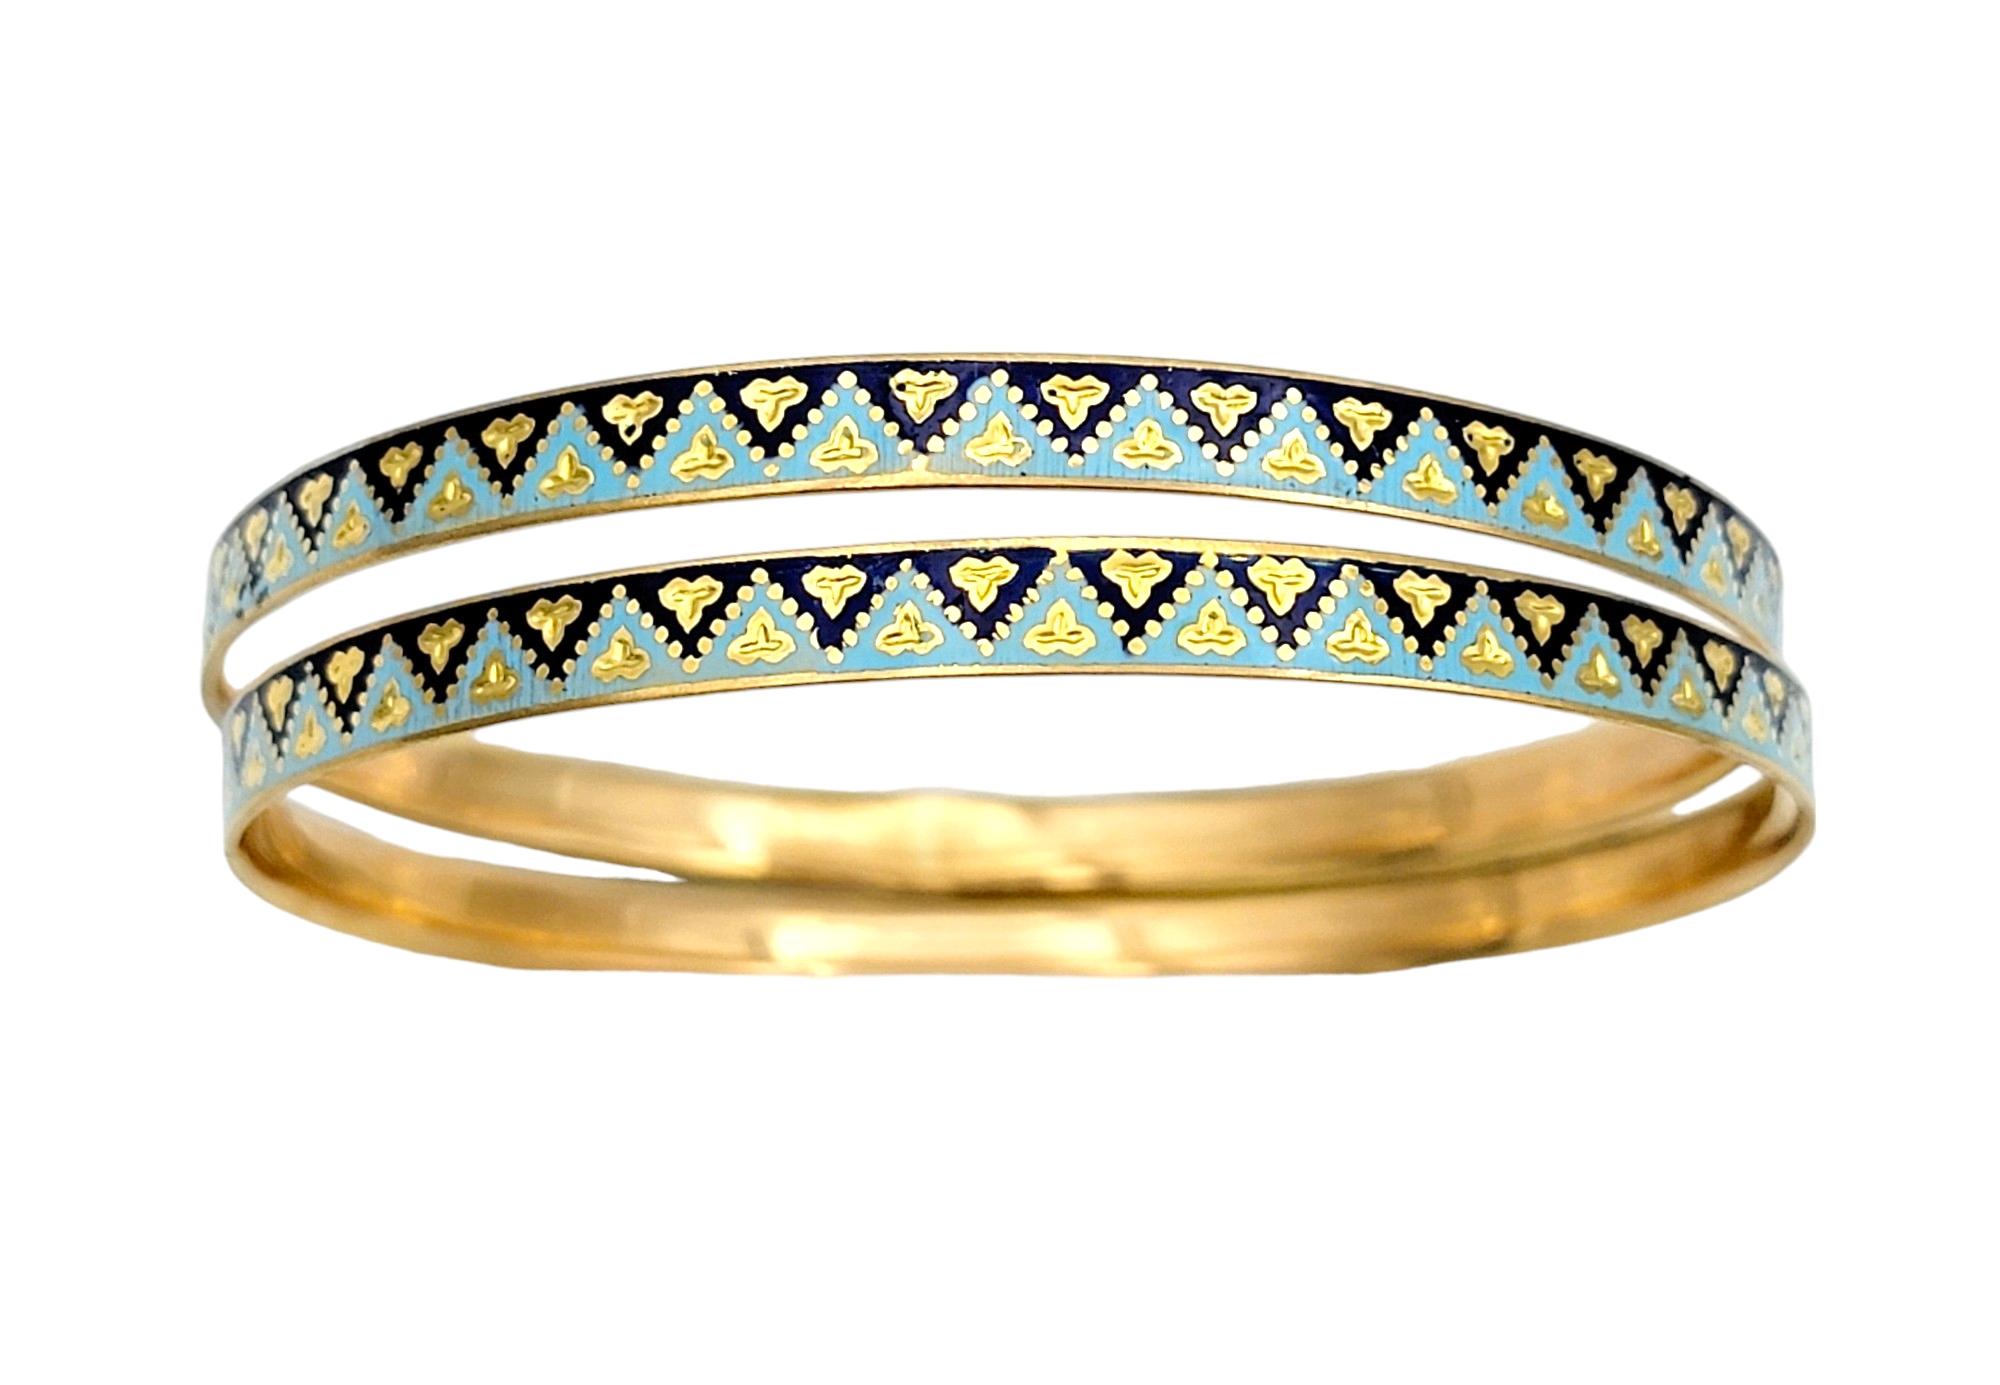 Introducing a luxurious set of two stacking bangle bracelets crafted in radiant 22 karat yellow gold, perfect for adding a touch of elegance to any ensemble. These identical pieces feature a mesmerizing zigzag design in alternating light blue and